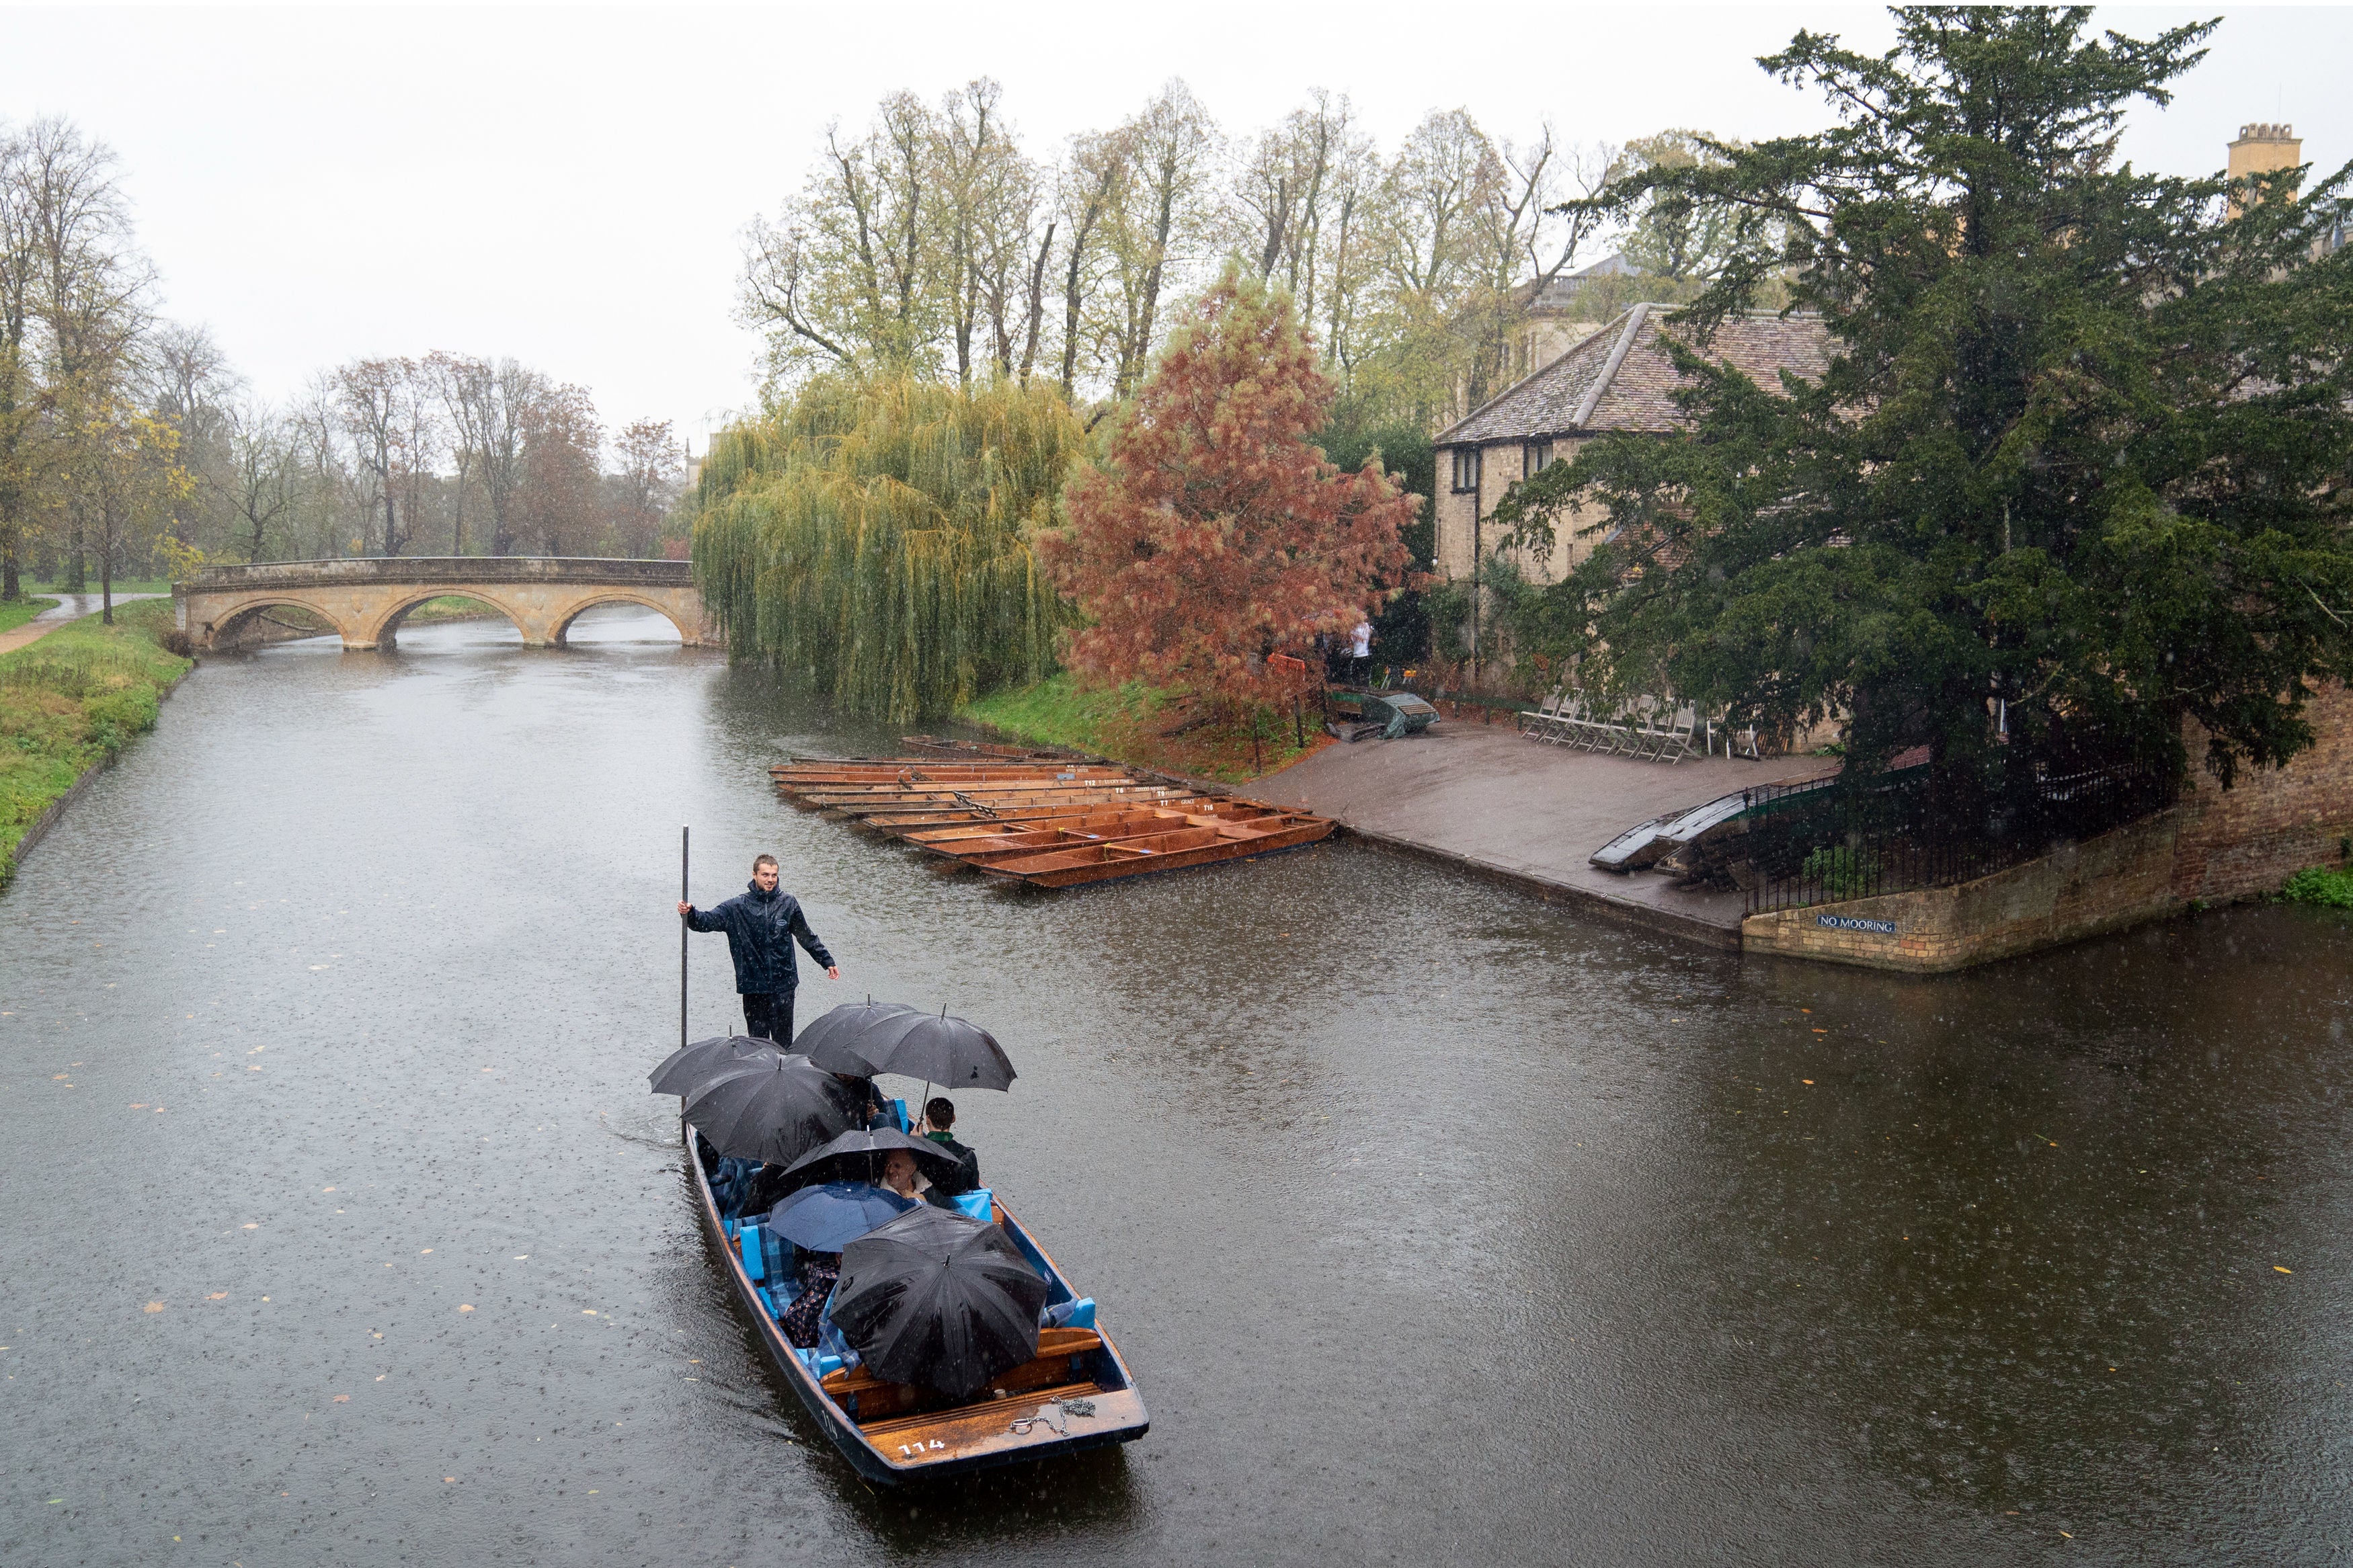 The attack took place near to the River Cam